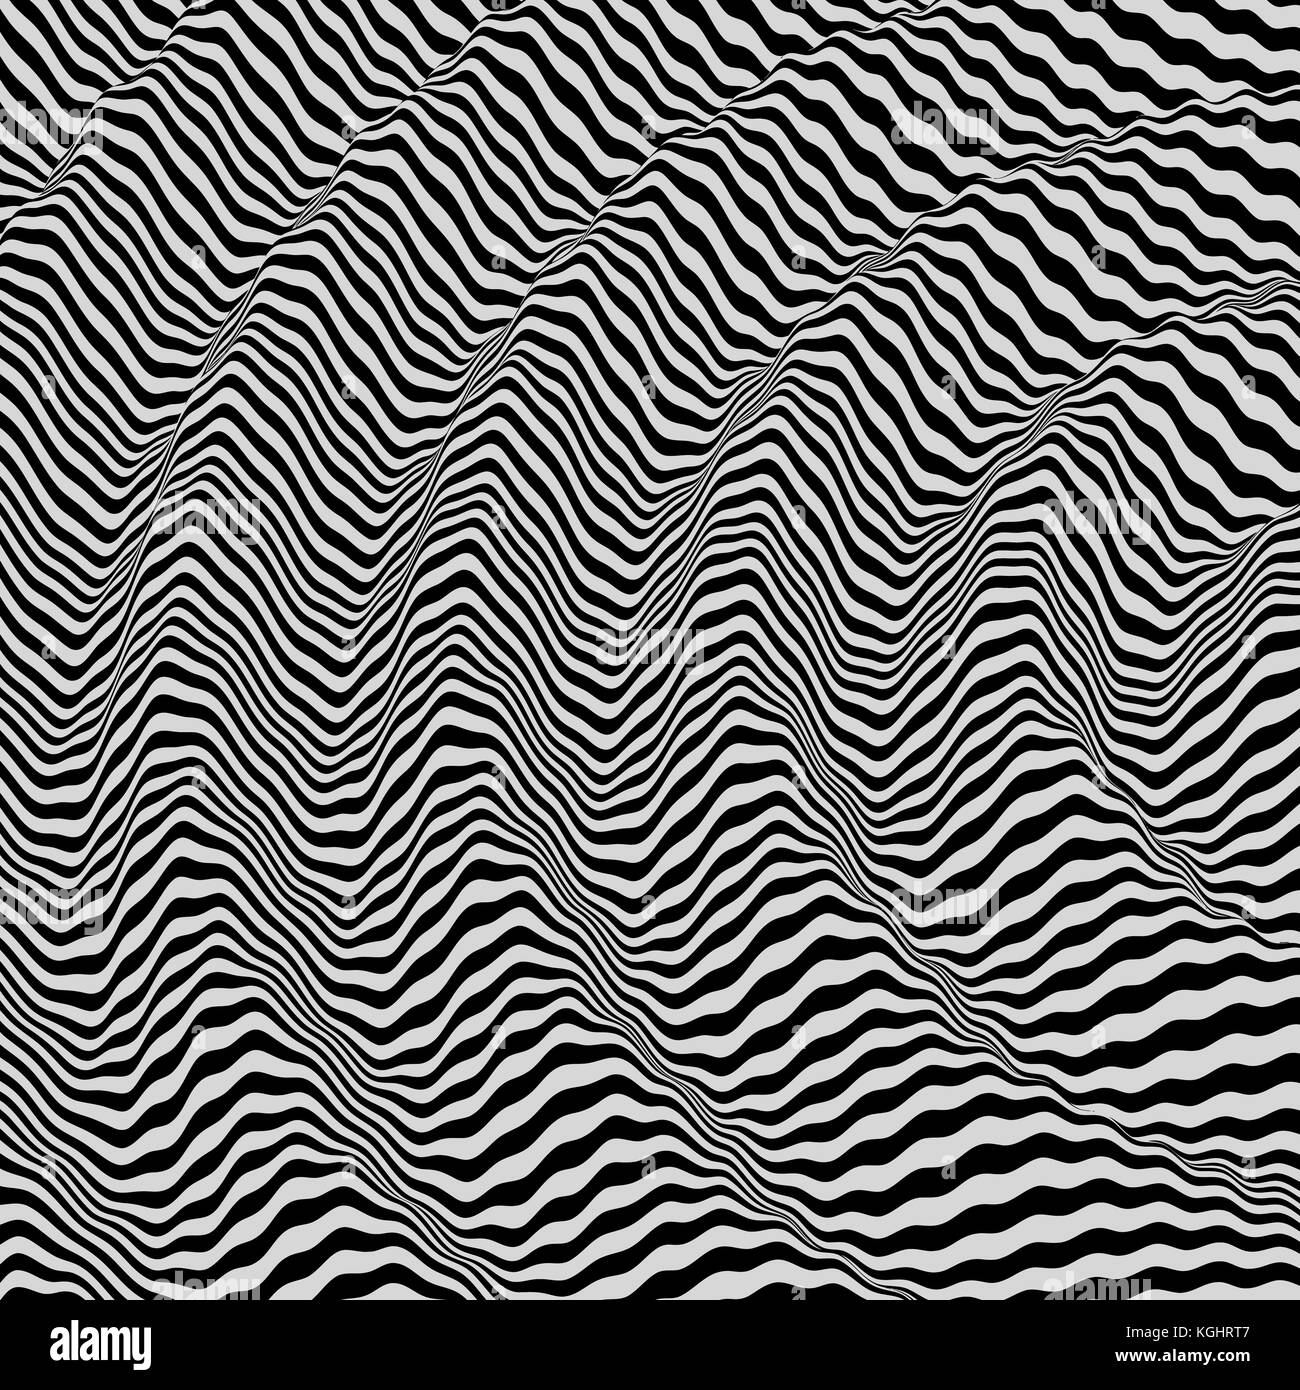 3D wavy background. Dynamic effect. Black and white design. Pattern with optical illusion. Vector illustration. Stock Vector